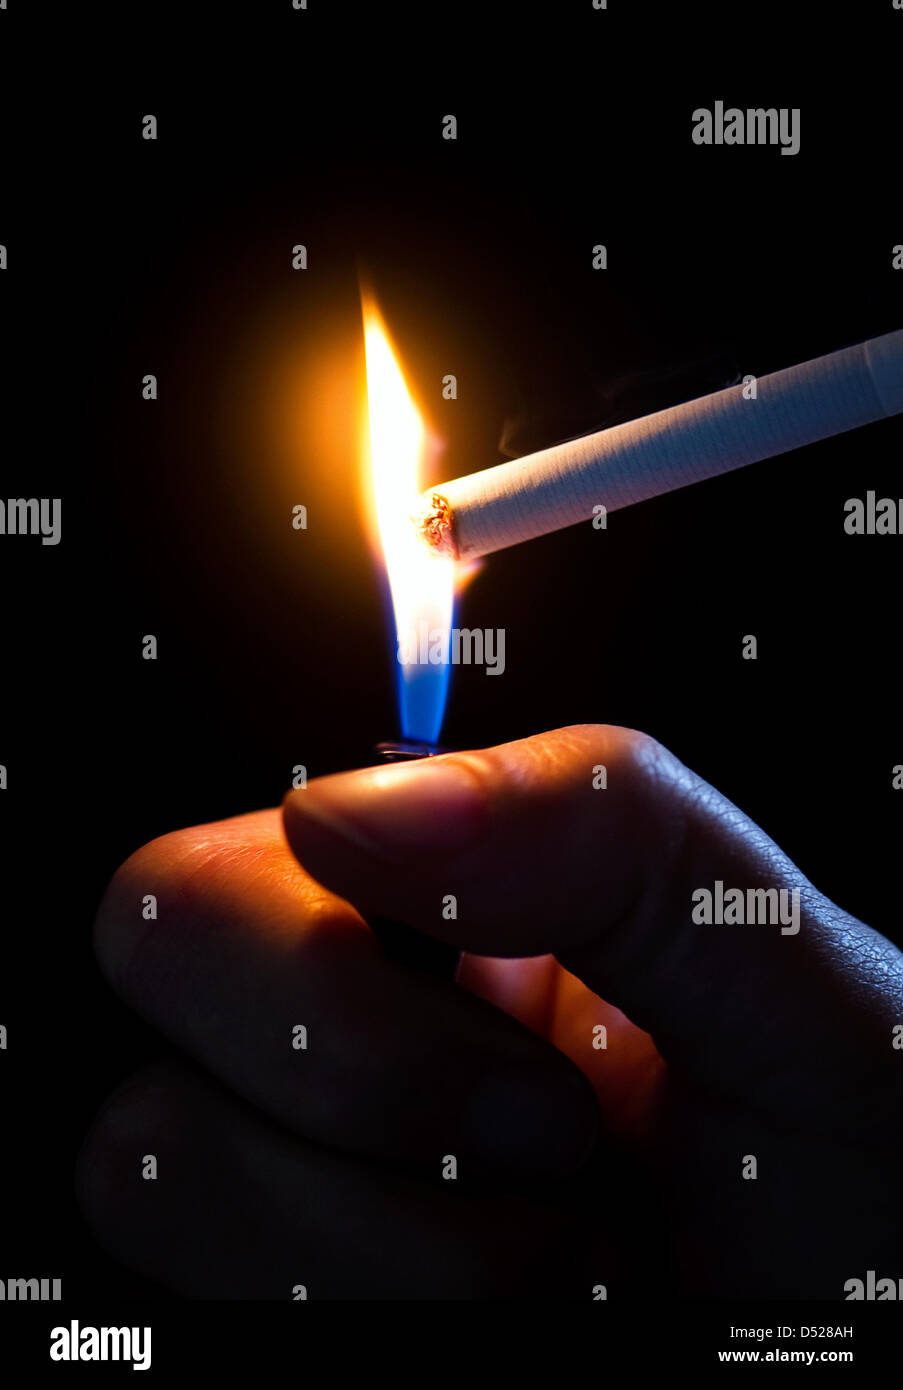 ILLUSTRATION - A smoker lights up a cigarette in Dresden, Germany, 25 October 2010. Germany's governemnt plans to increase the tax on tobacco while alleviating the environmental tax burden on businesses. Photo: Arno Burgi Stock Photo